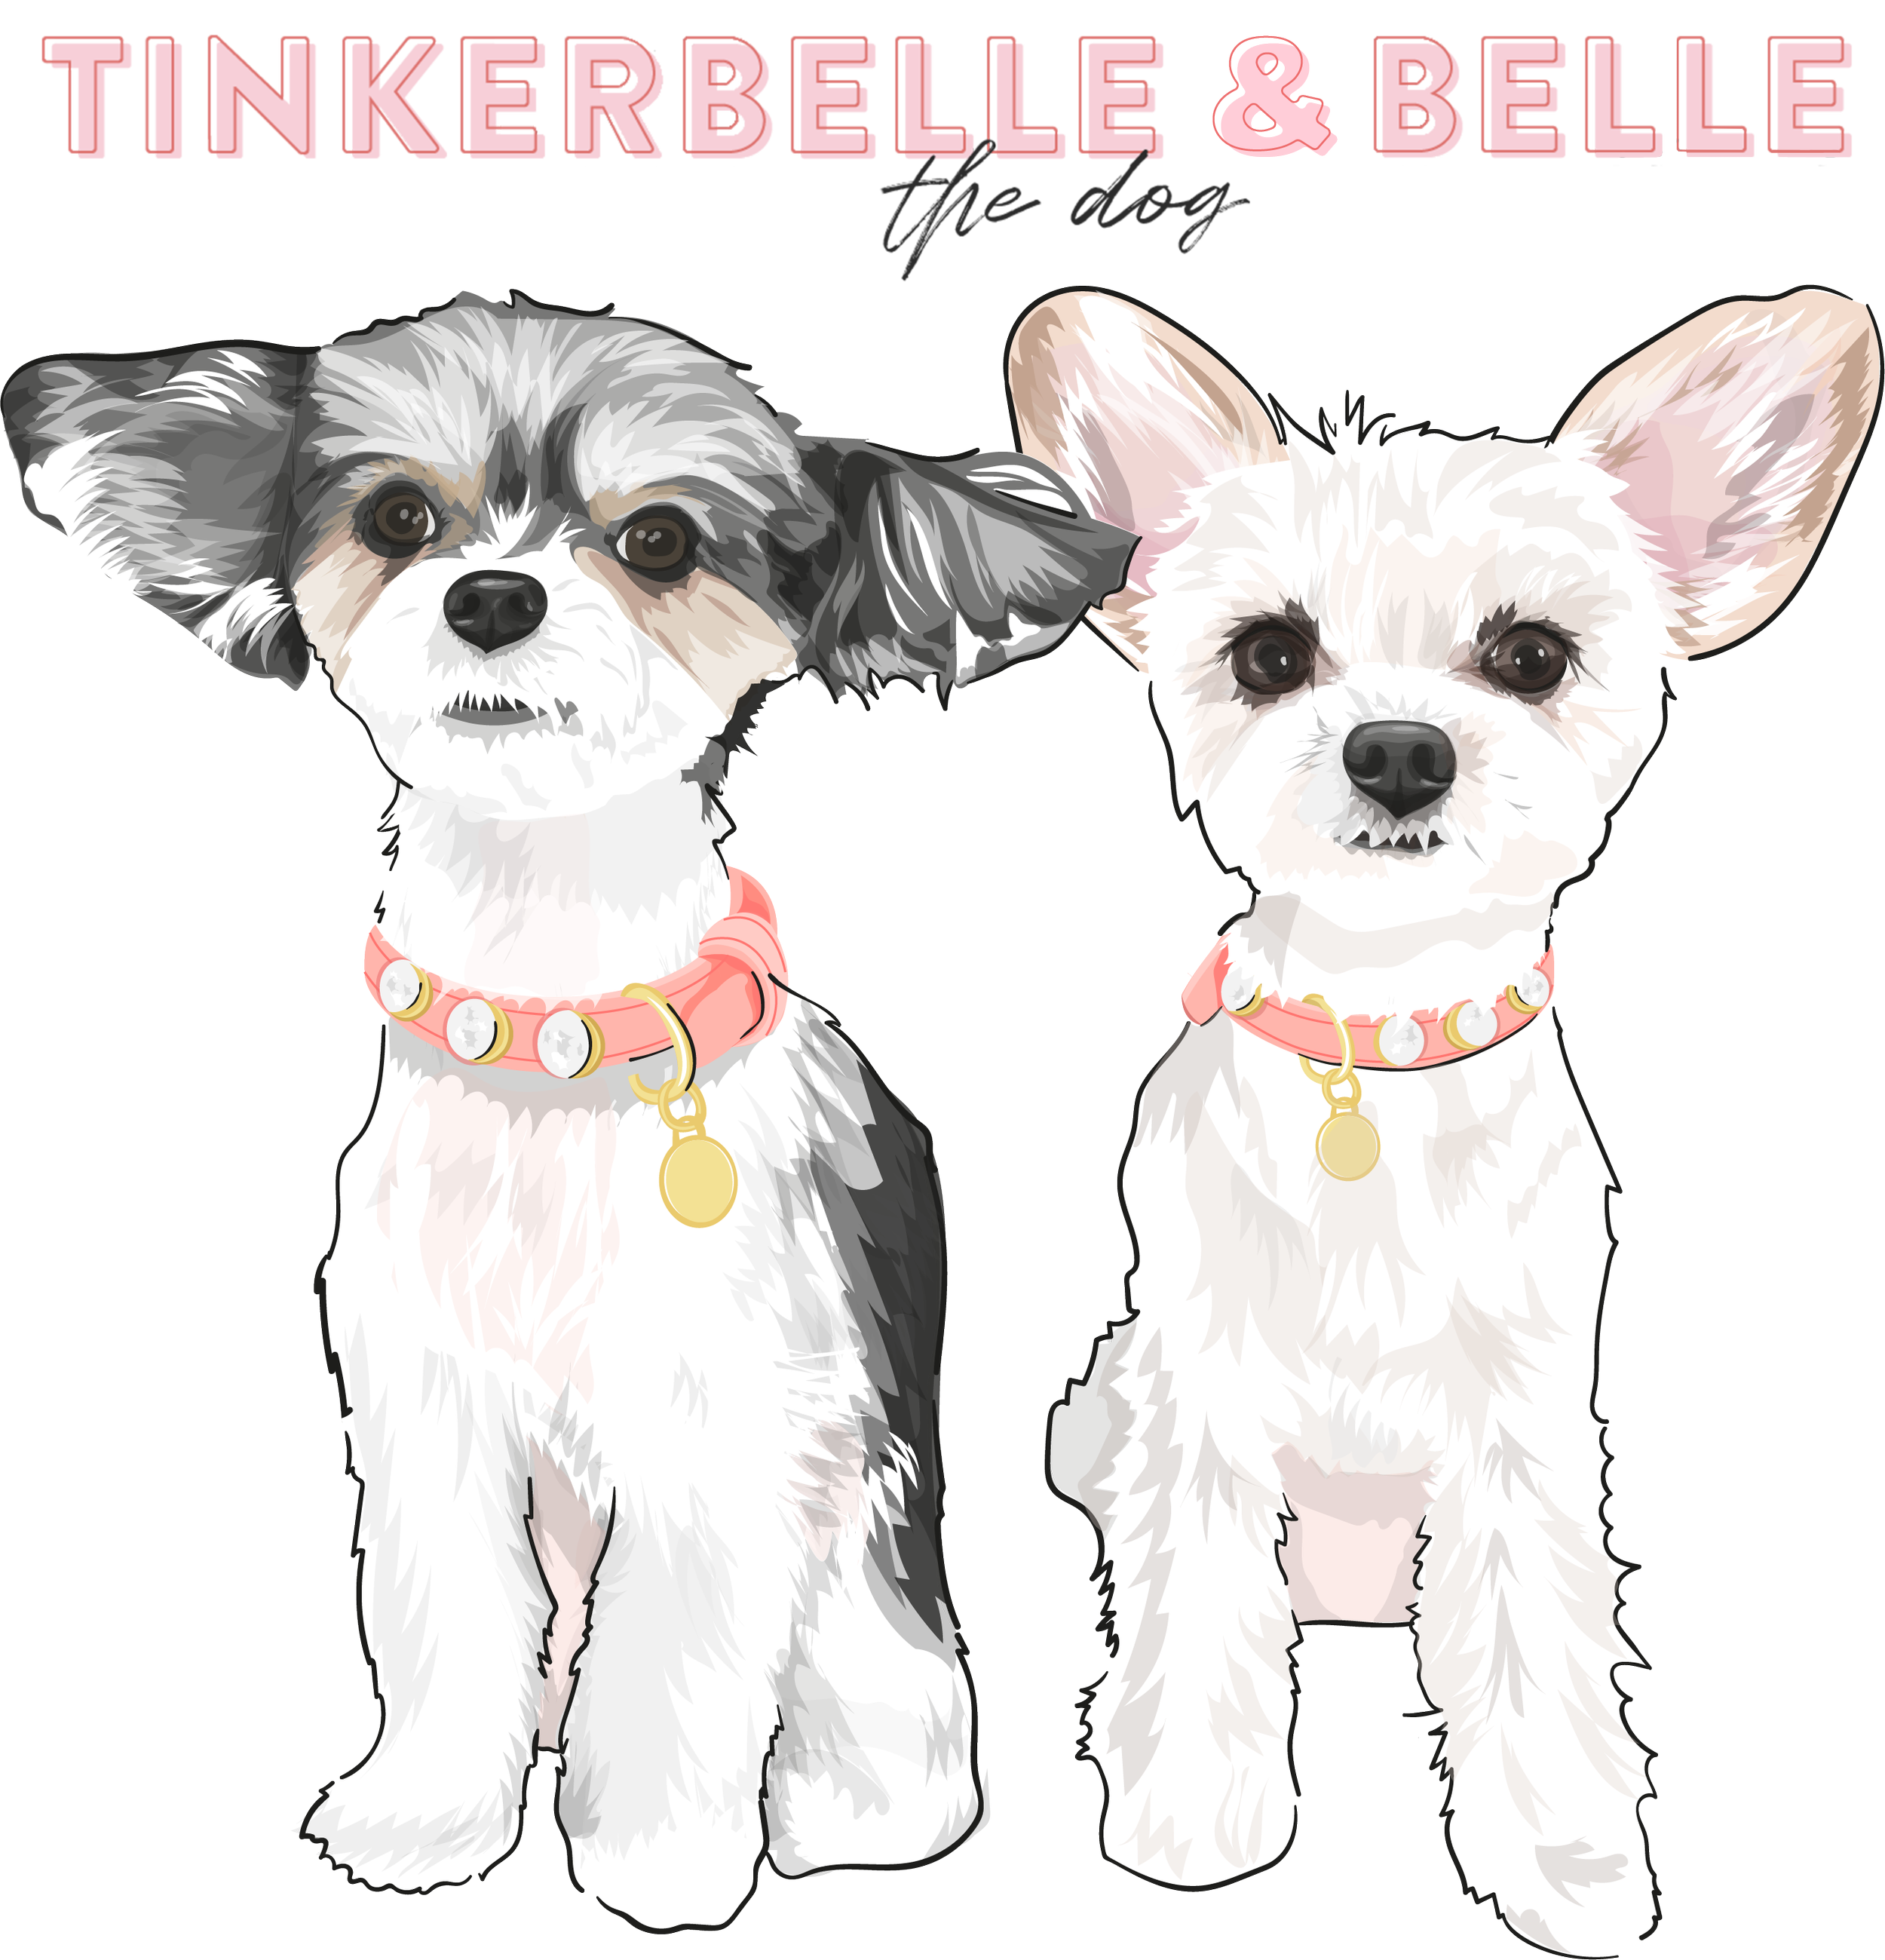 Tinkerbelle The Dog®